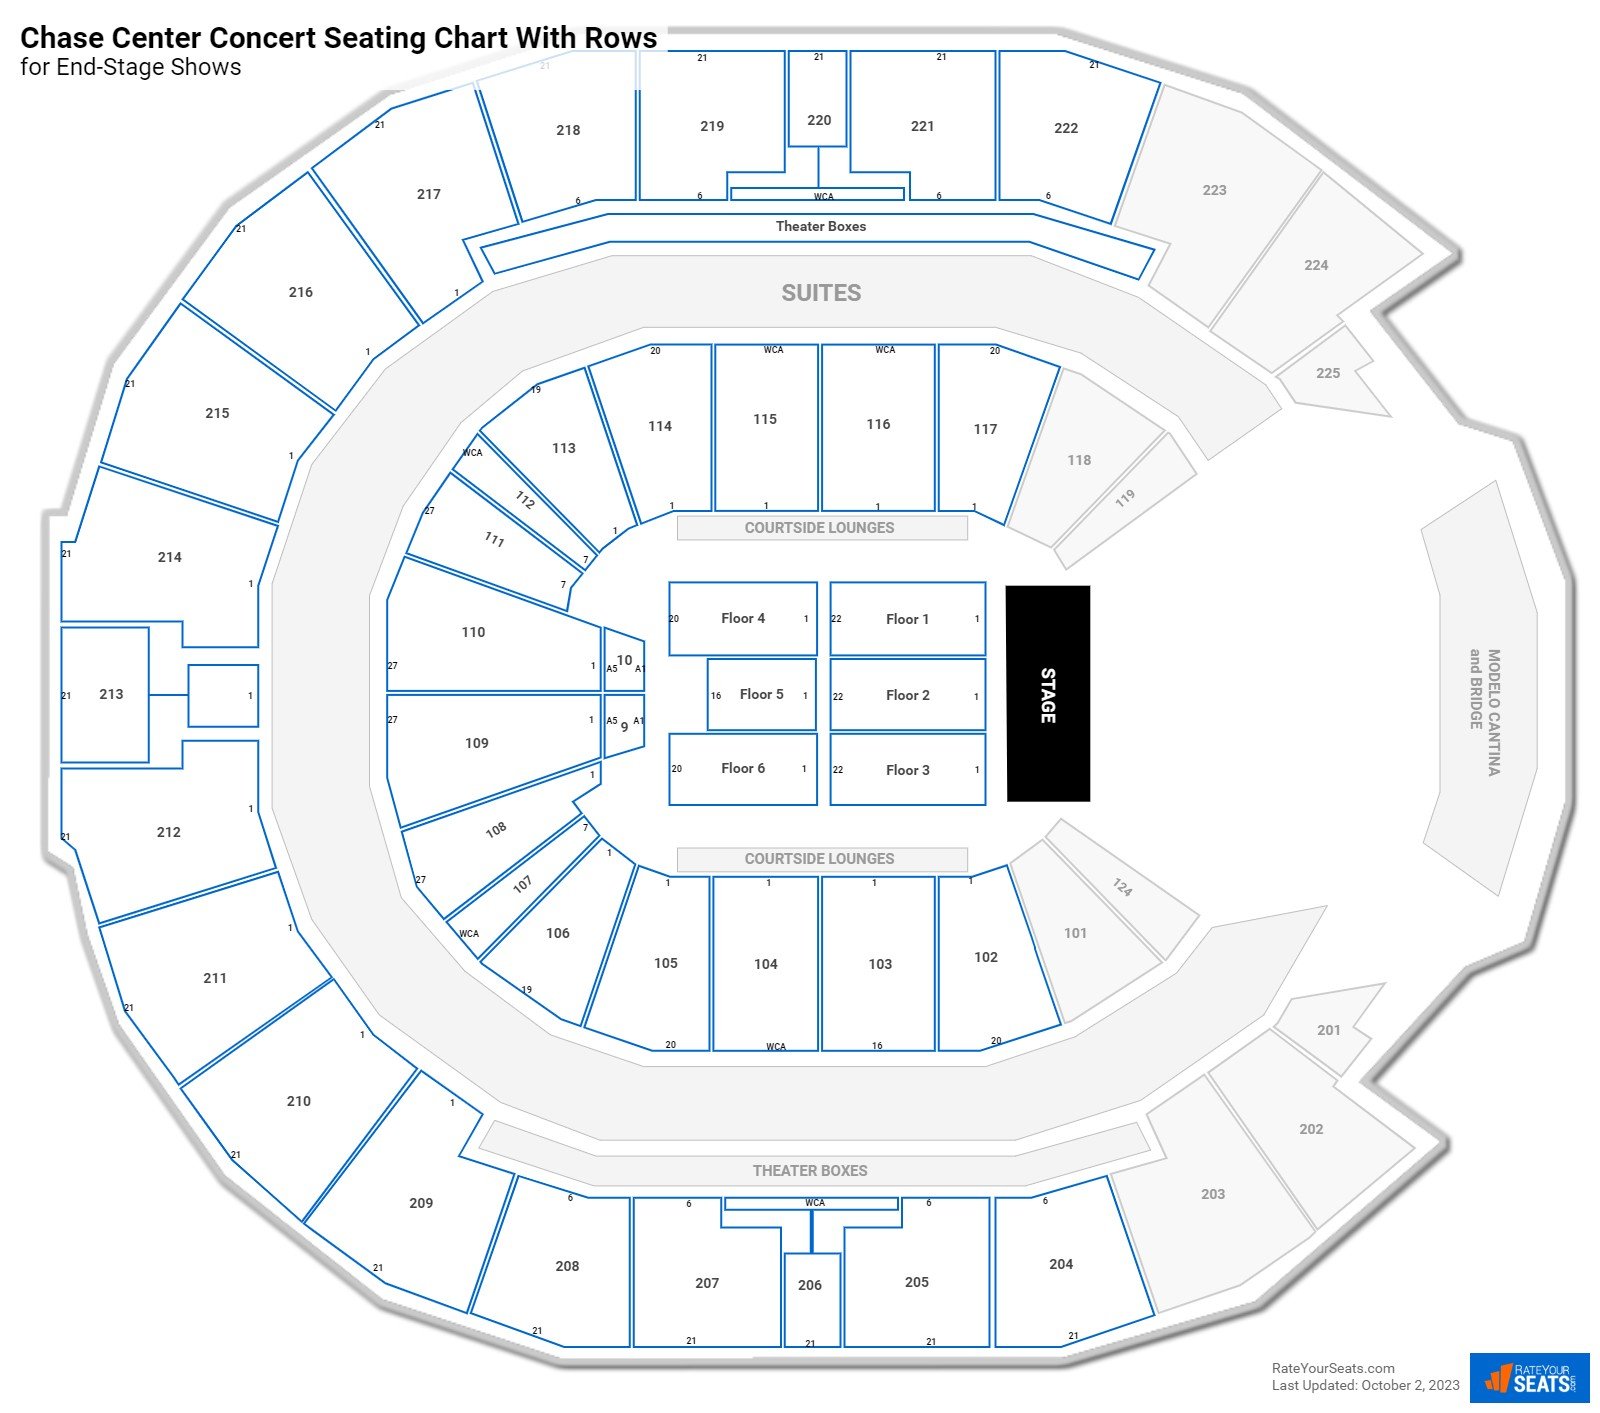 Chase Center seating chart with row numbers